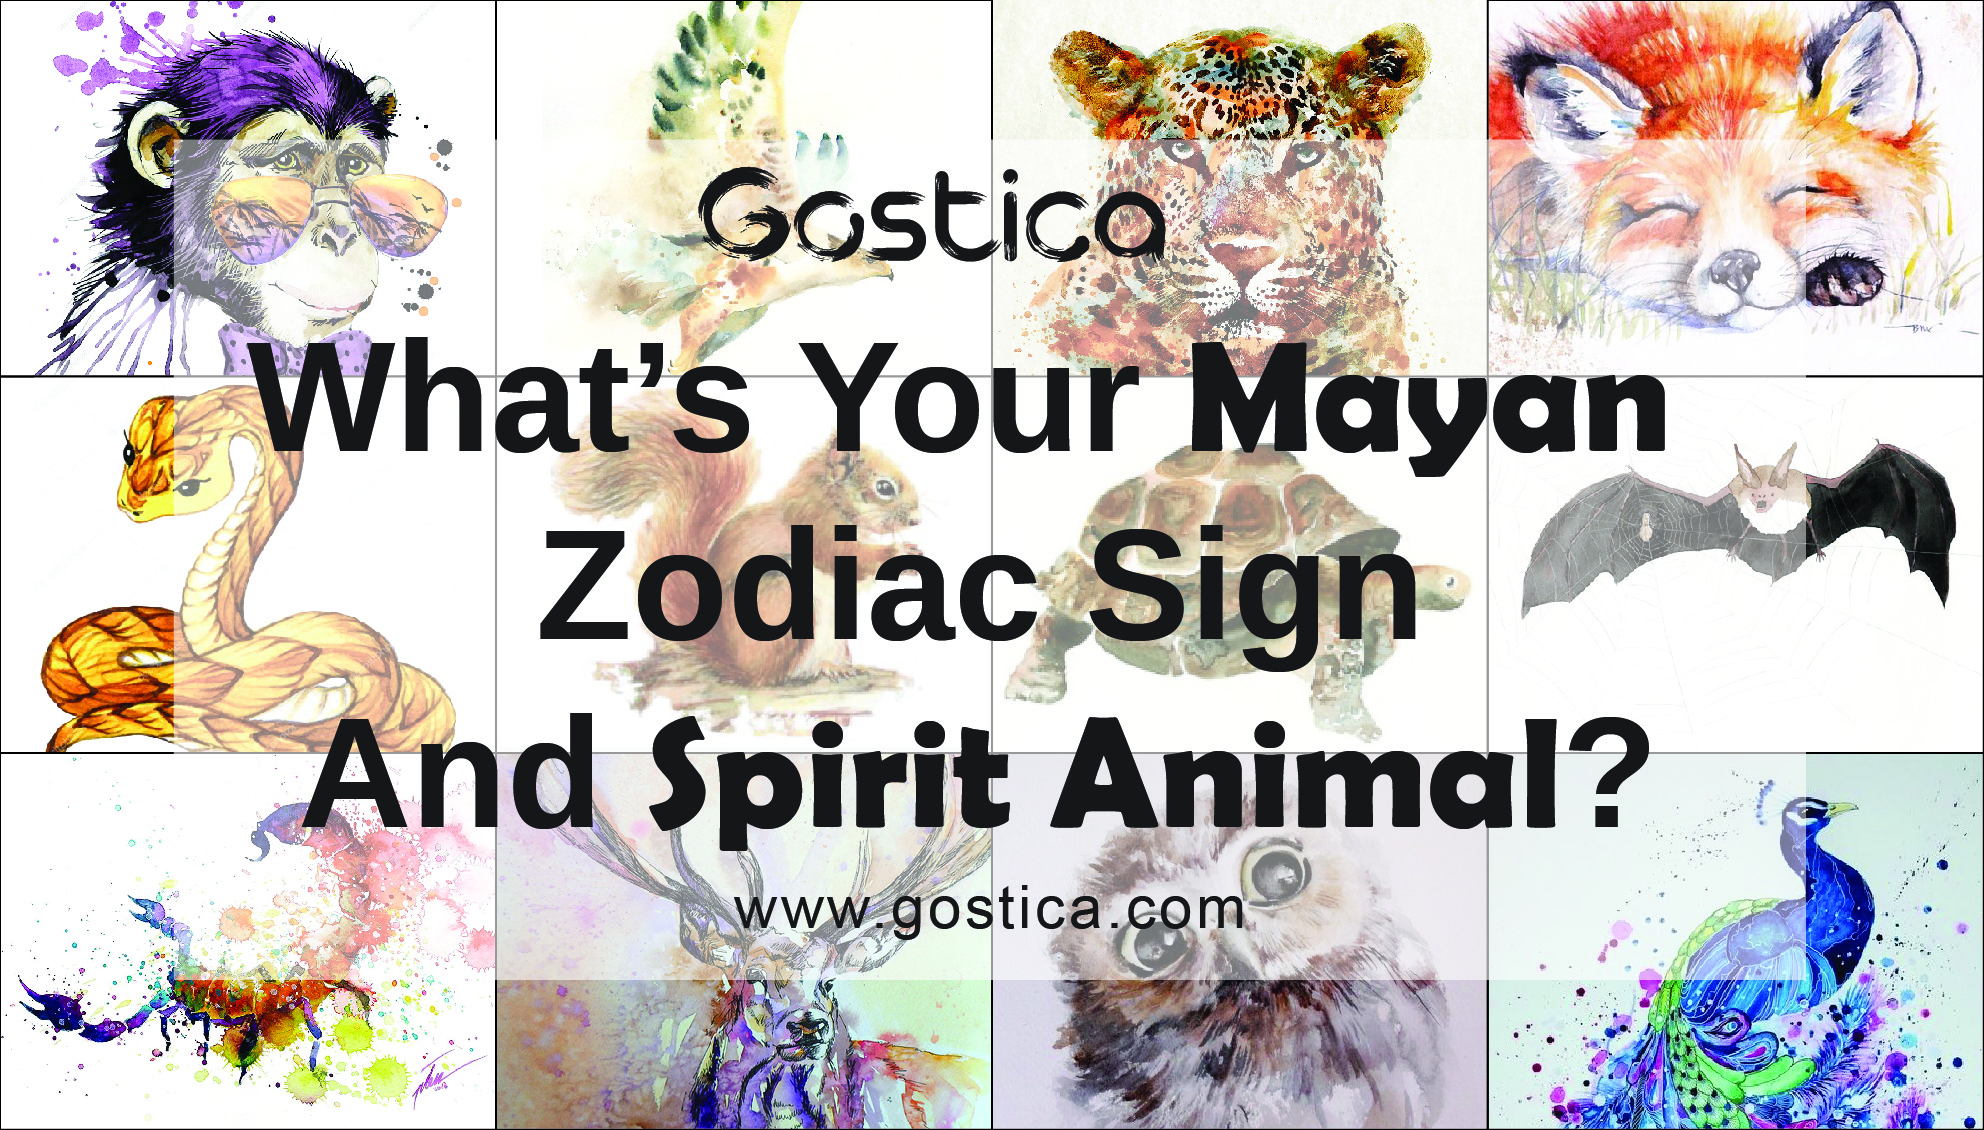 What’s-Your-Mayan-Zodiac-Signg-01.jpg